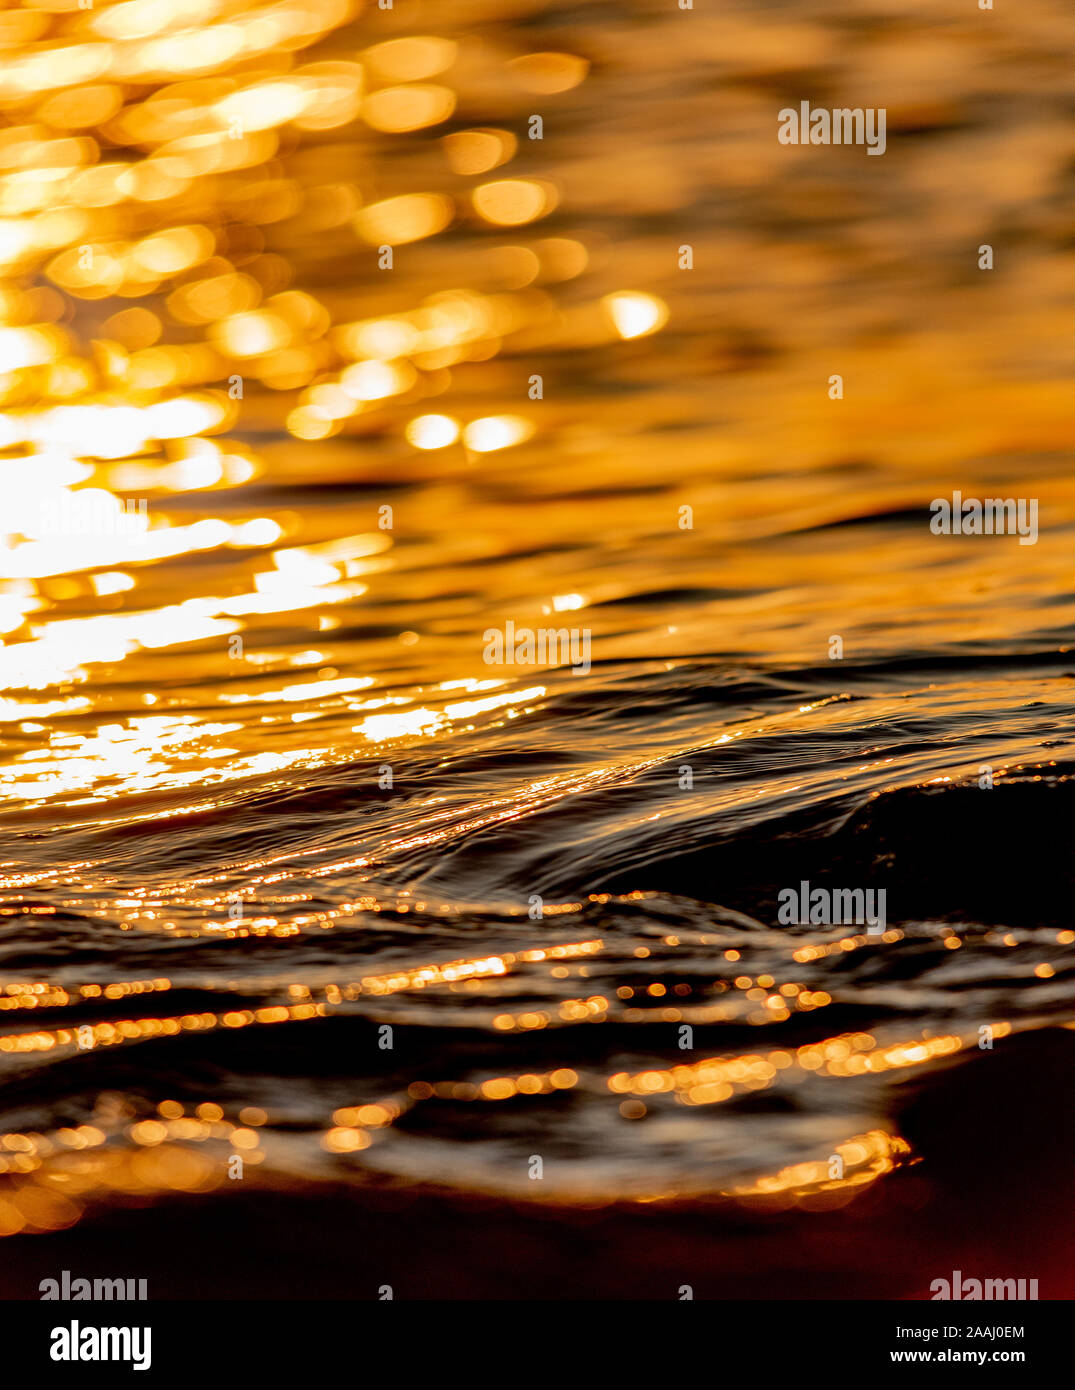 Close-up of sea waves and water movement on the surface of the sea in the golden sunlight. Light reflections on the water. Stock Photo